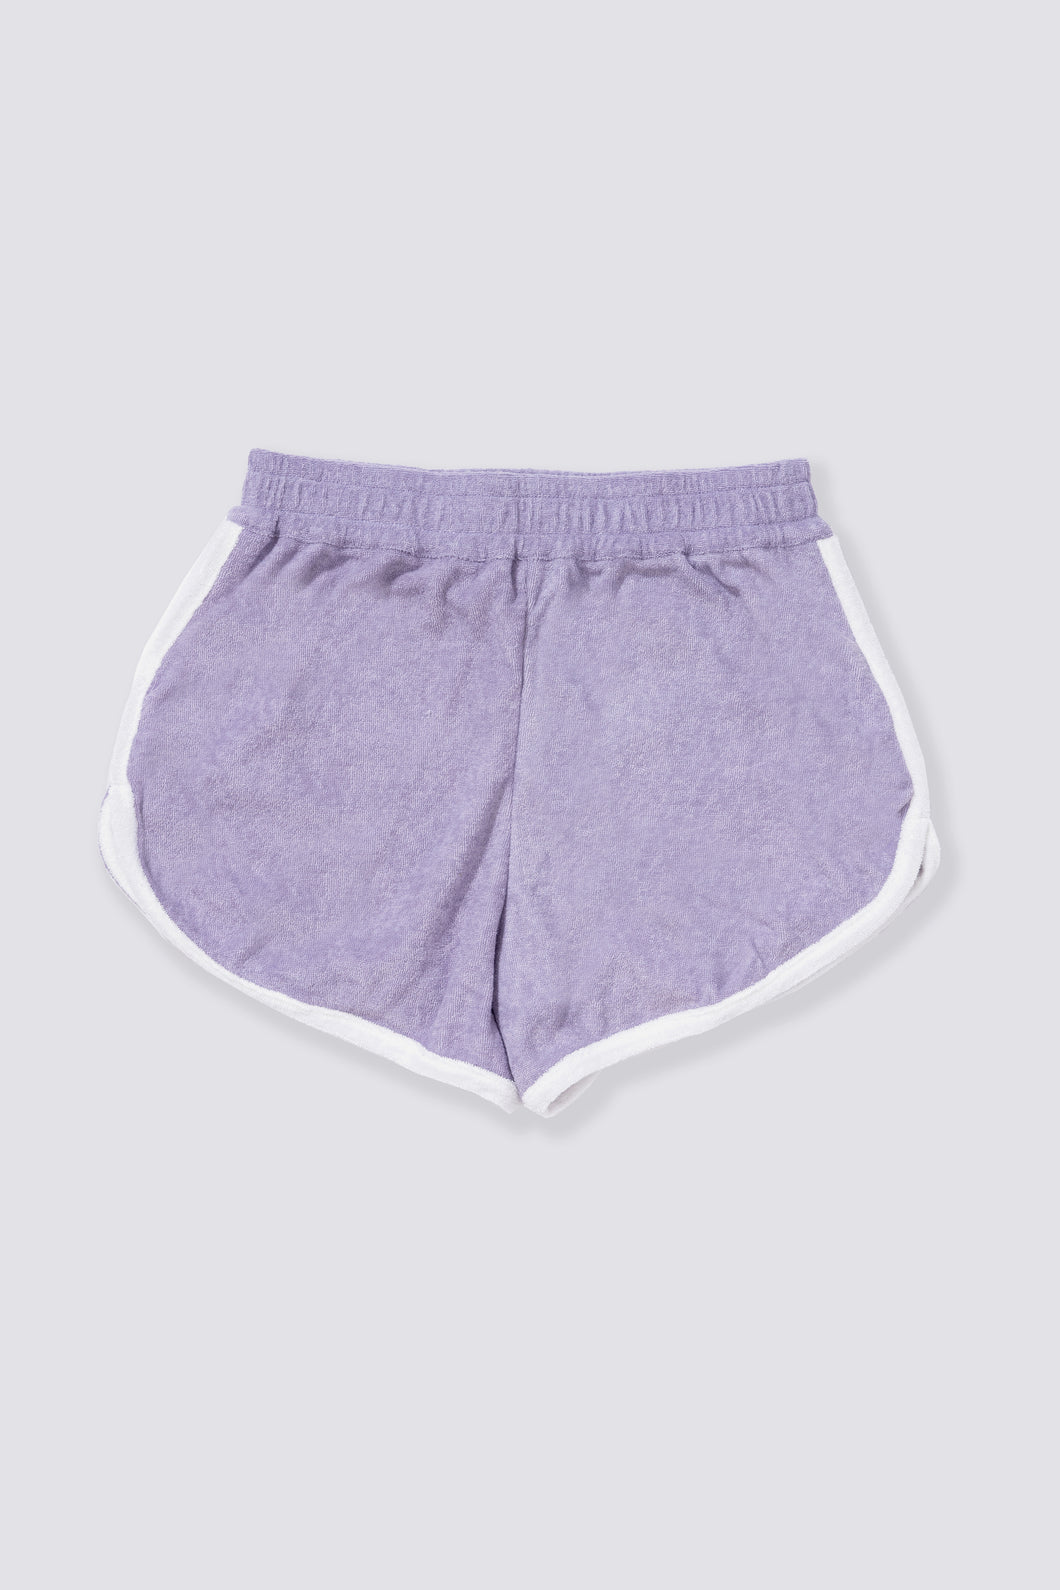 Roller Terry Shorts - French Lavender